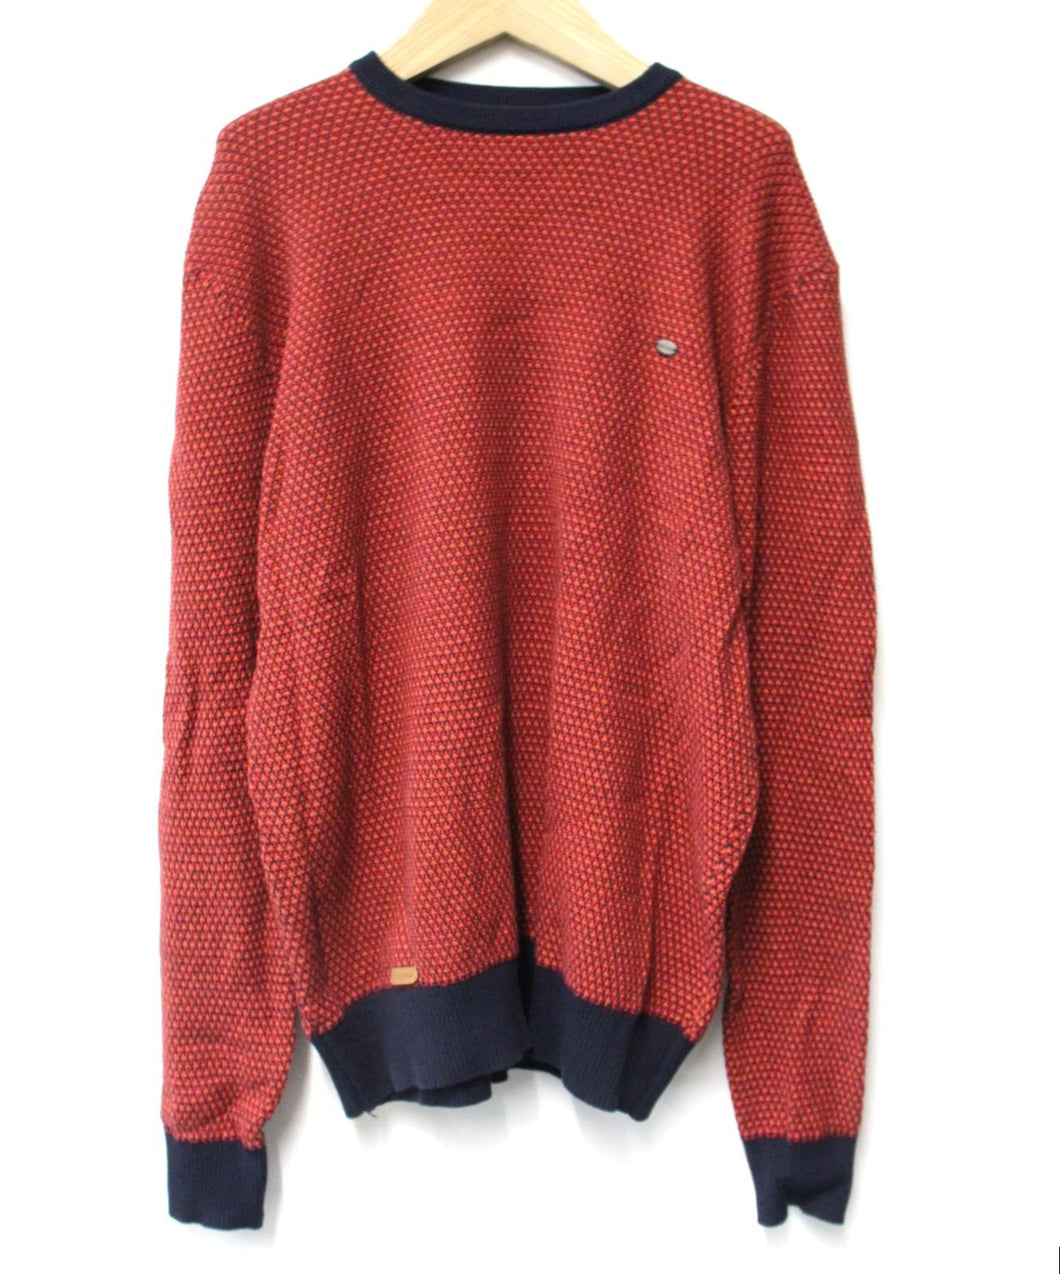 AIOPESON Men's Red Cotton Blend Knitted Long Sleeve Pullover Sweater Approx M